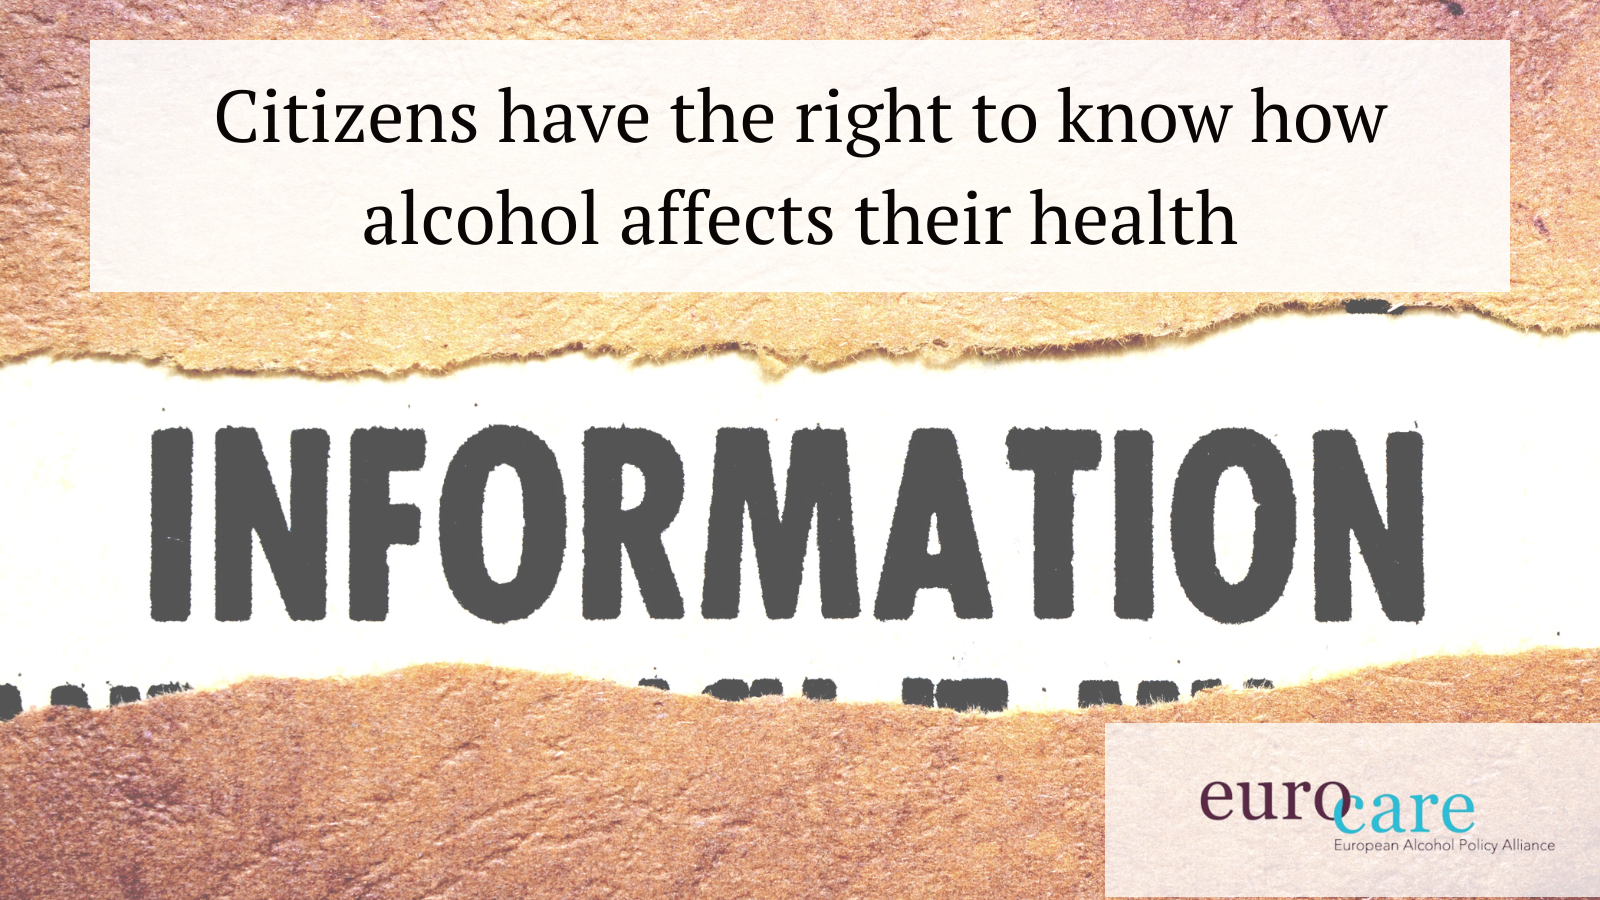 European citizens have the right to know how alcohol affects their health